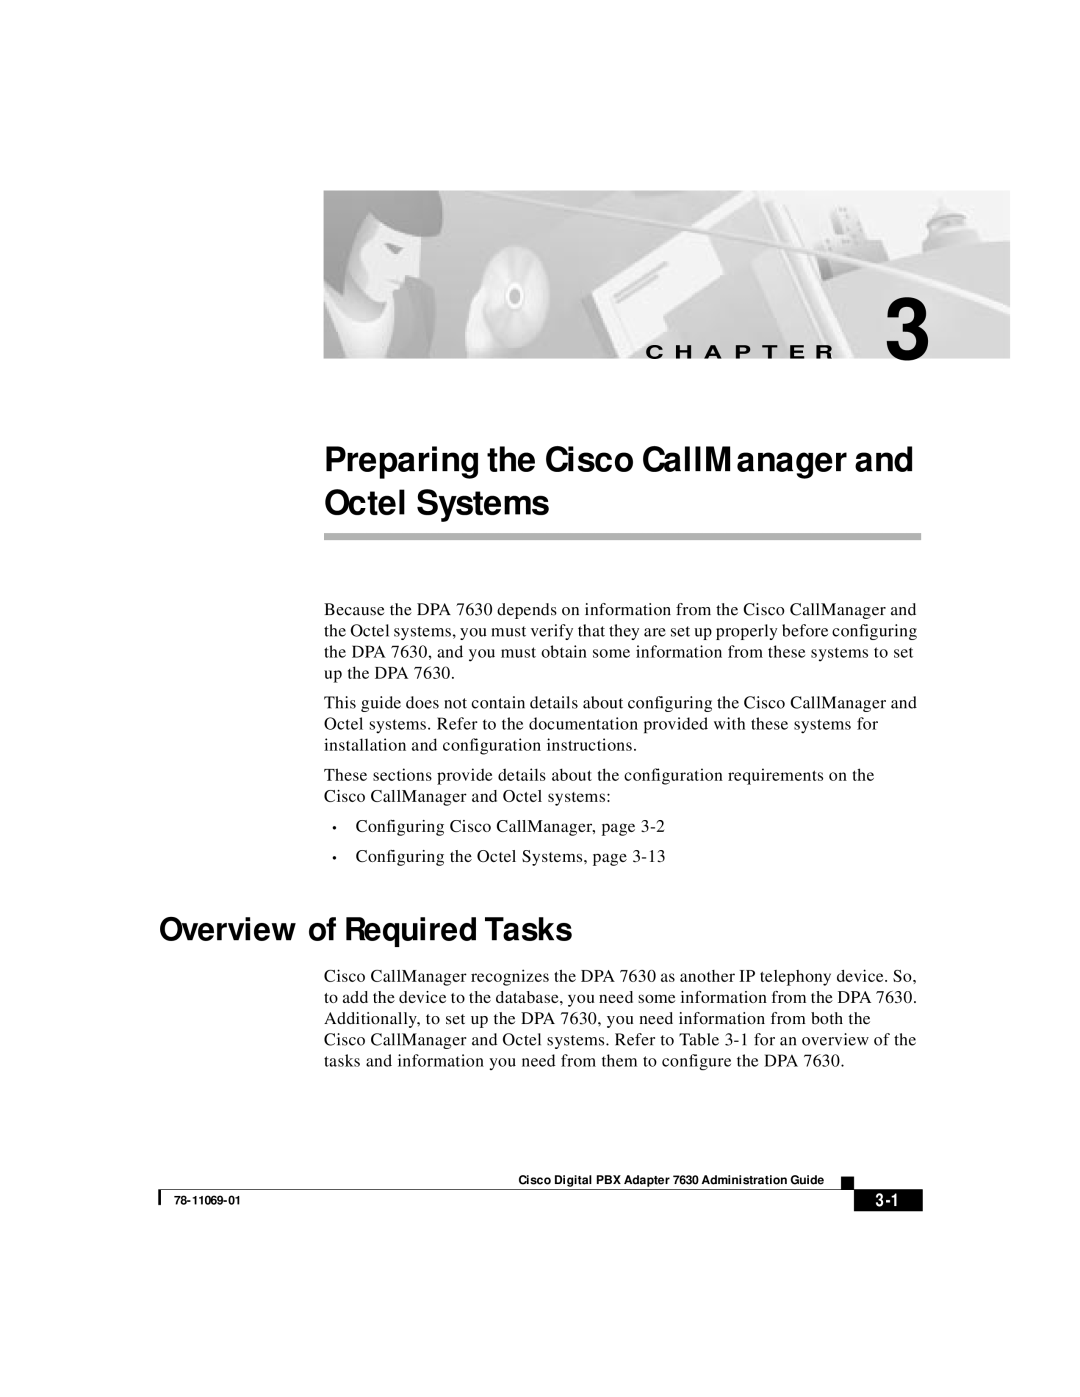 3Com 78-11069-01 manual Overview of Required Tasks, Preparing the Cisco CallManager and Octel Systems, C H A P T E R 